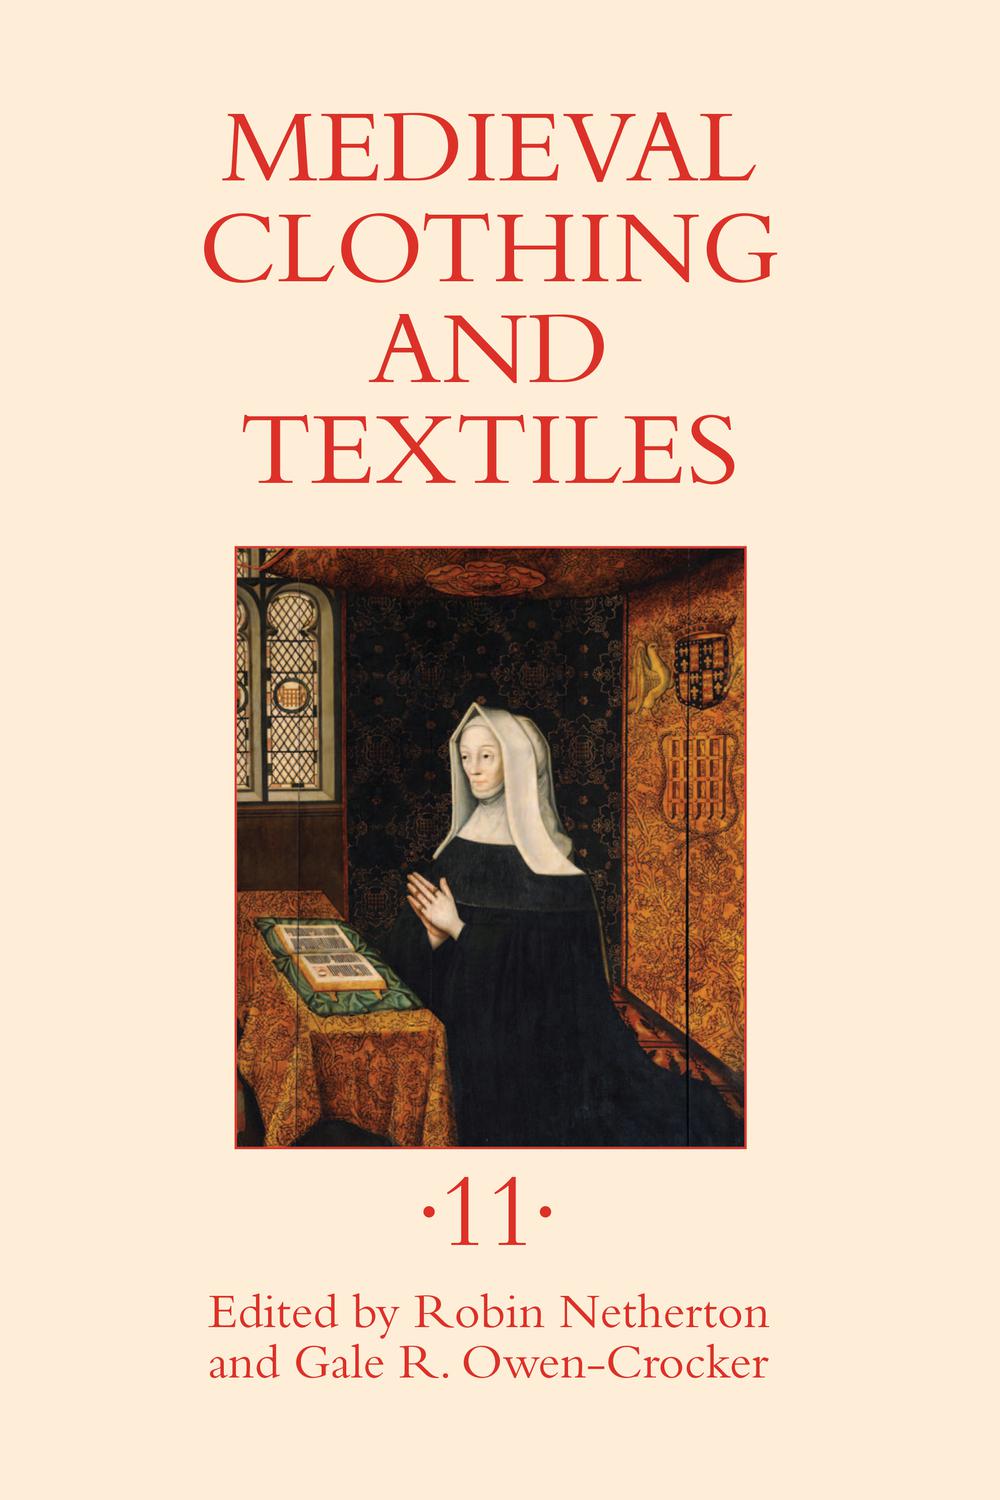 Medieval Clothing and Textiles 11 - Robin Netherton, Gale R. Owen-Crocker